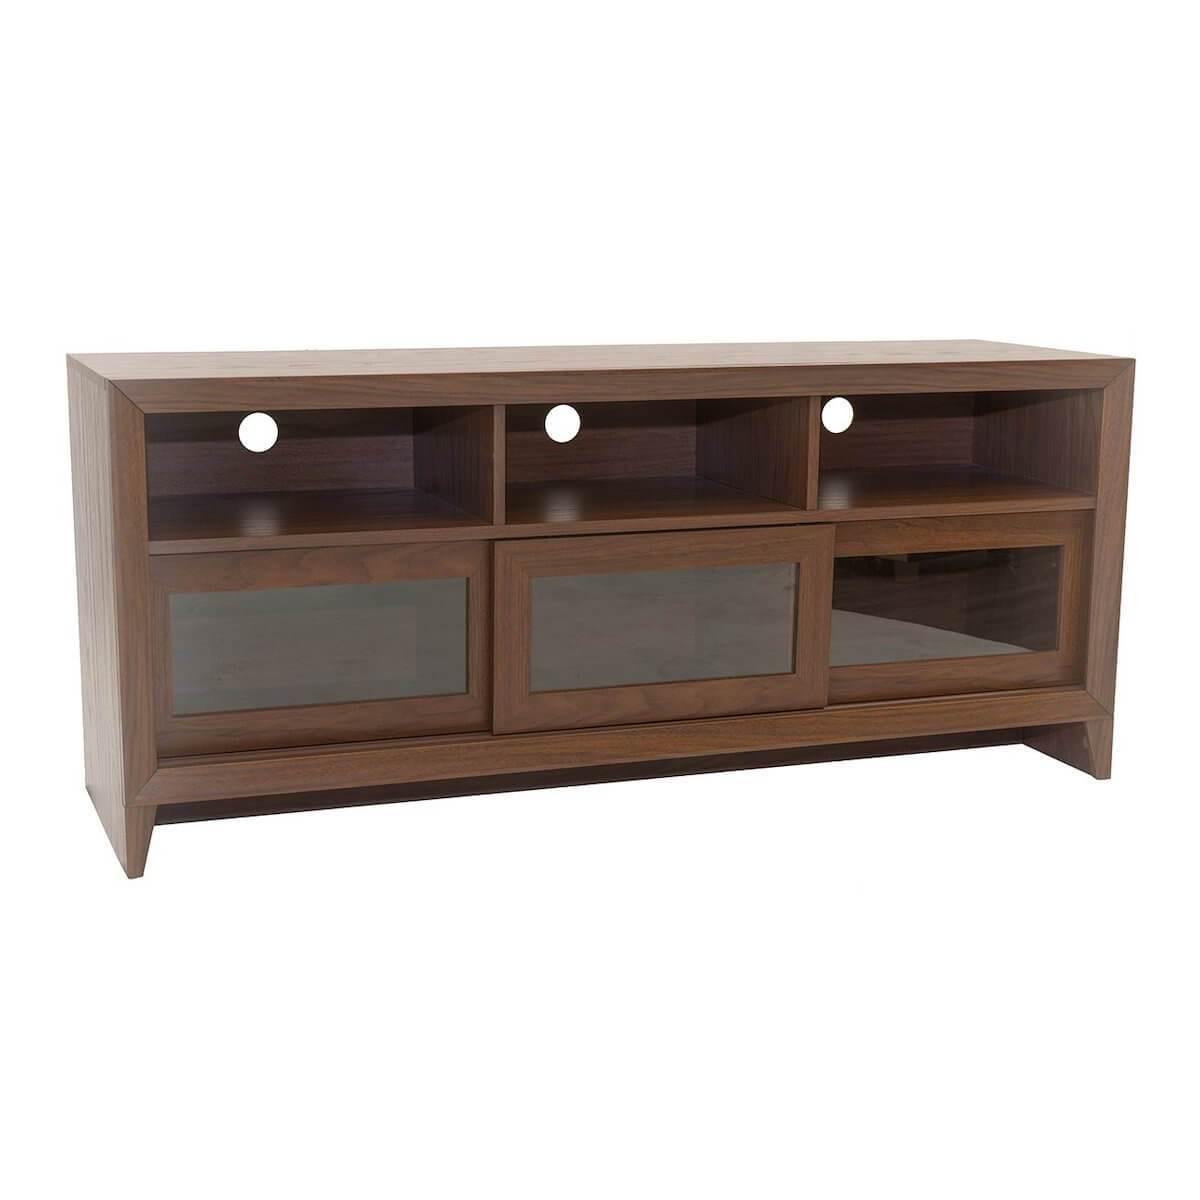 Techni Mobili Hickory Modern TV Stand with Storage for TVs Up To 60" RTA-8811-HRY